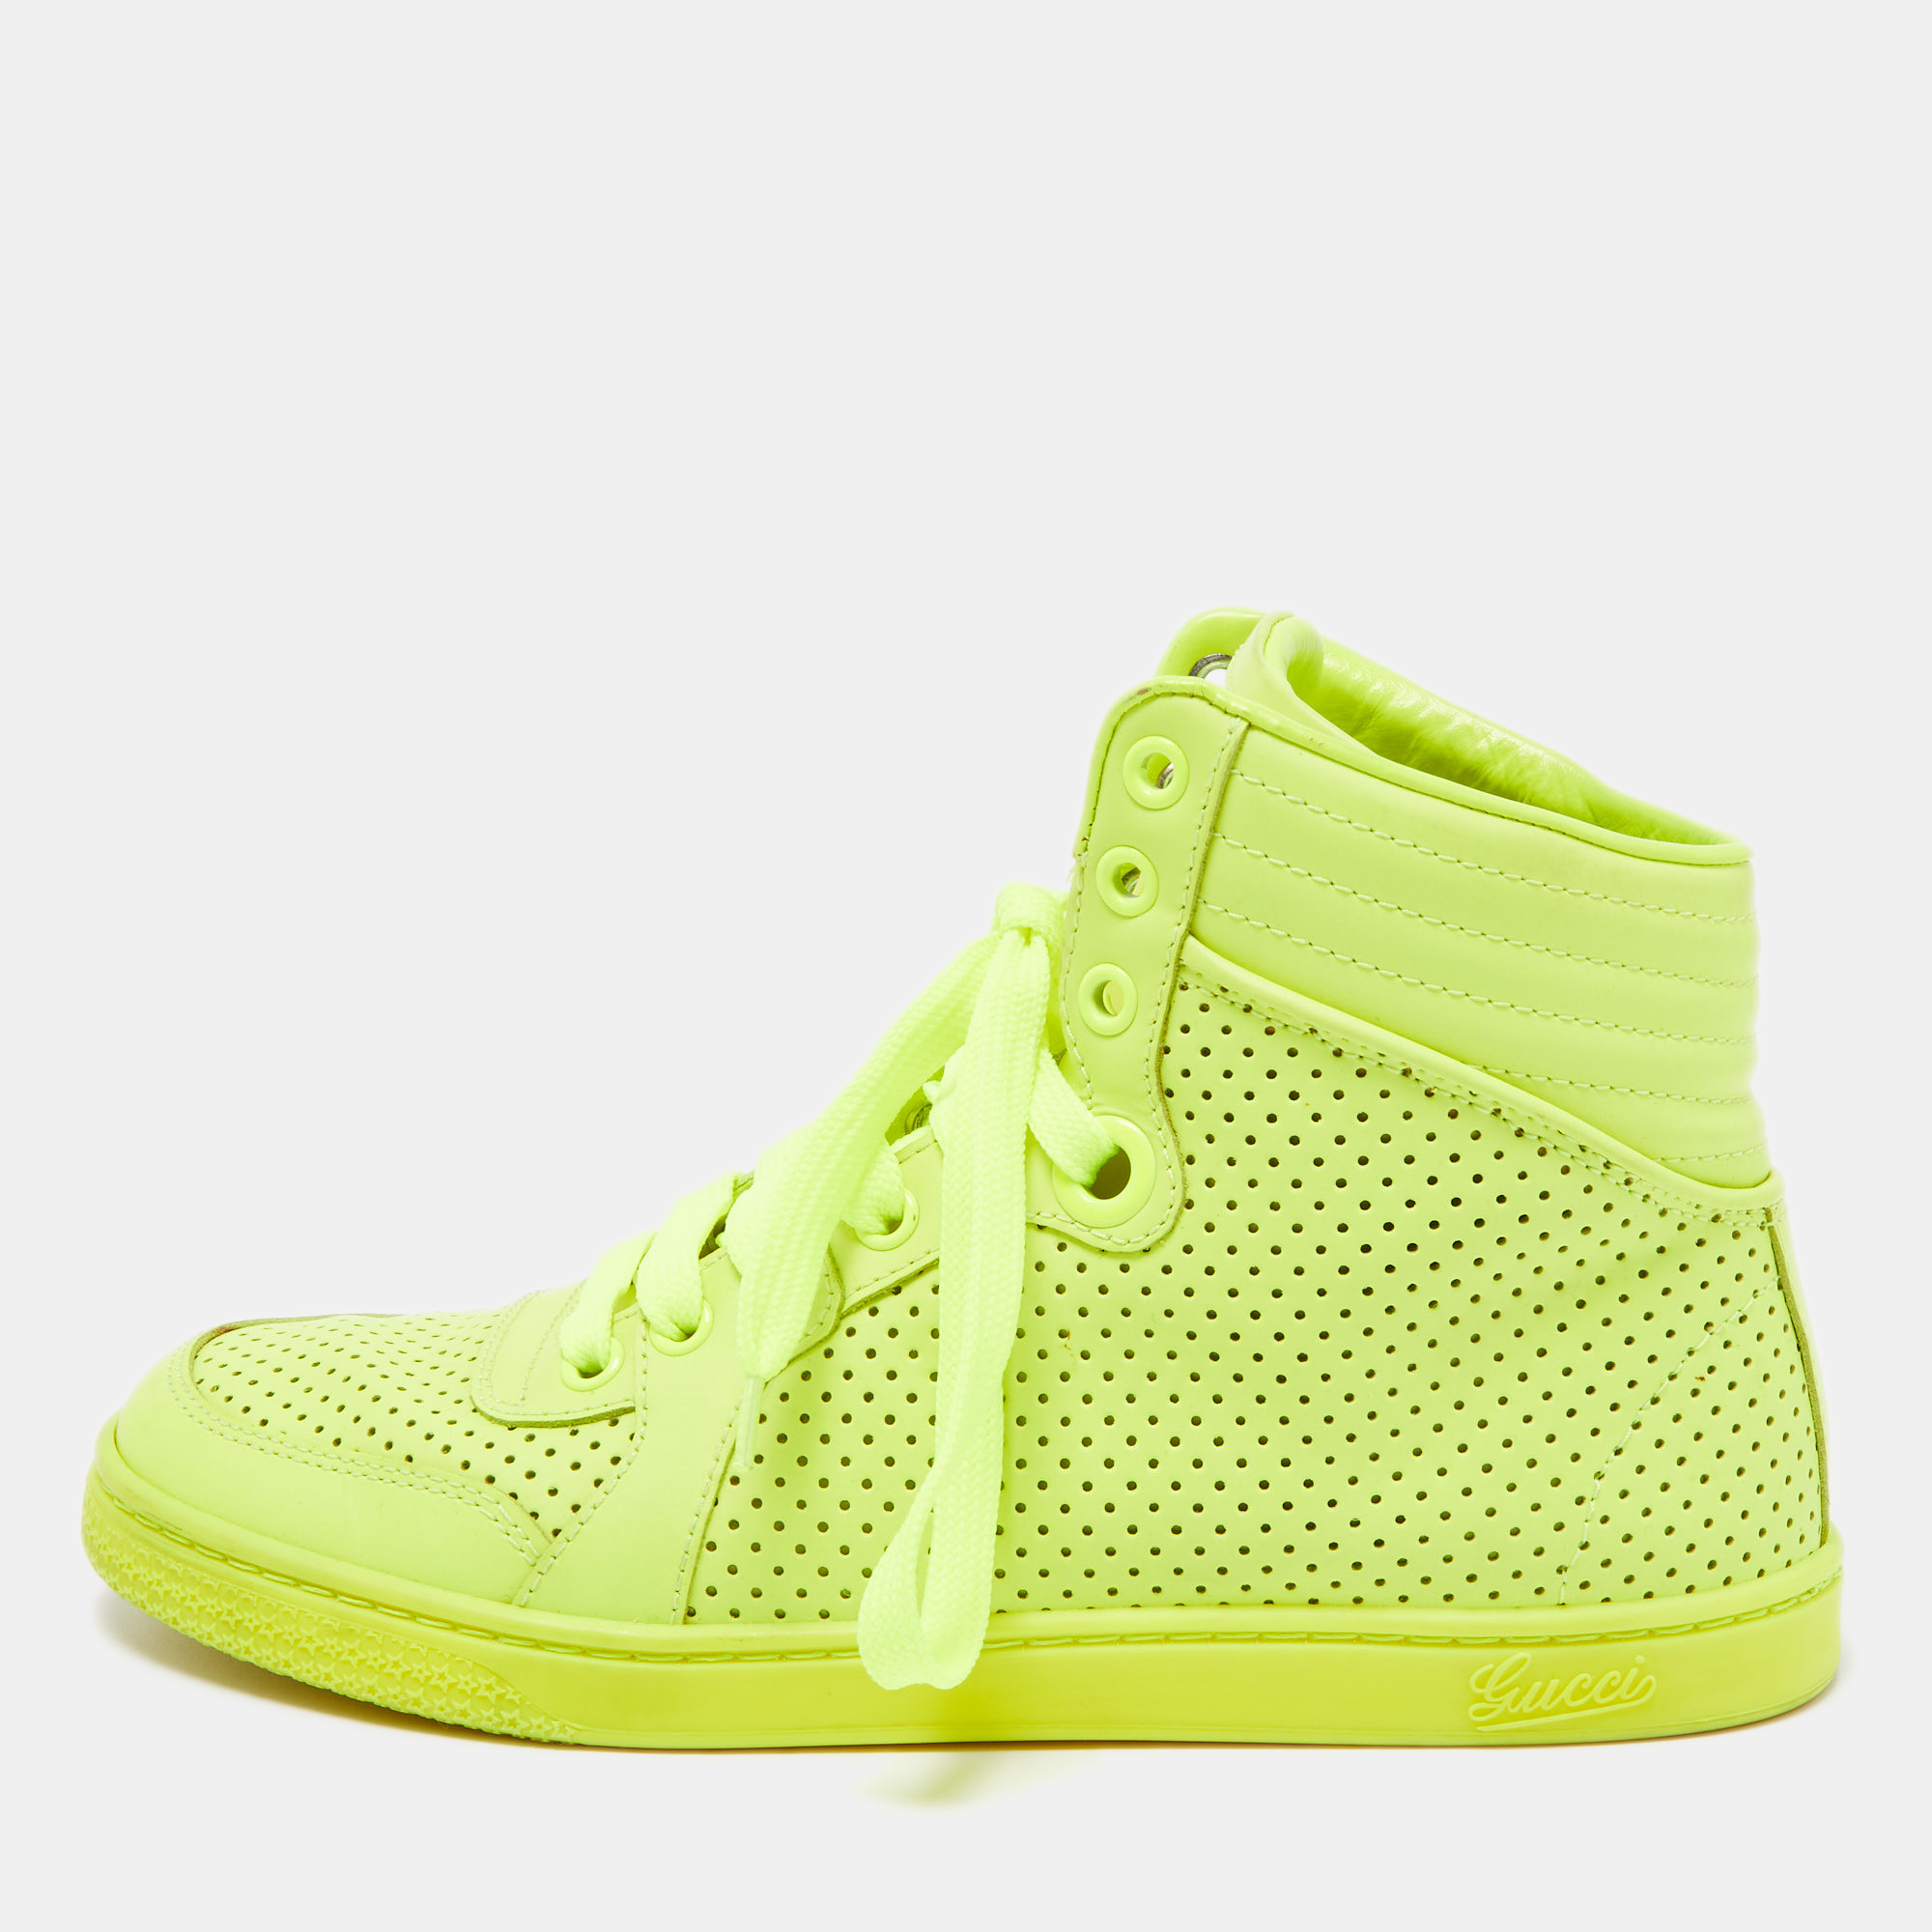 Gucci Neon Green Leather High Top Sneakers Size 35.5